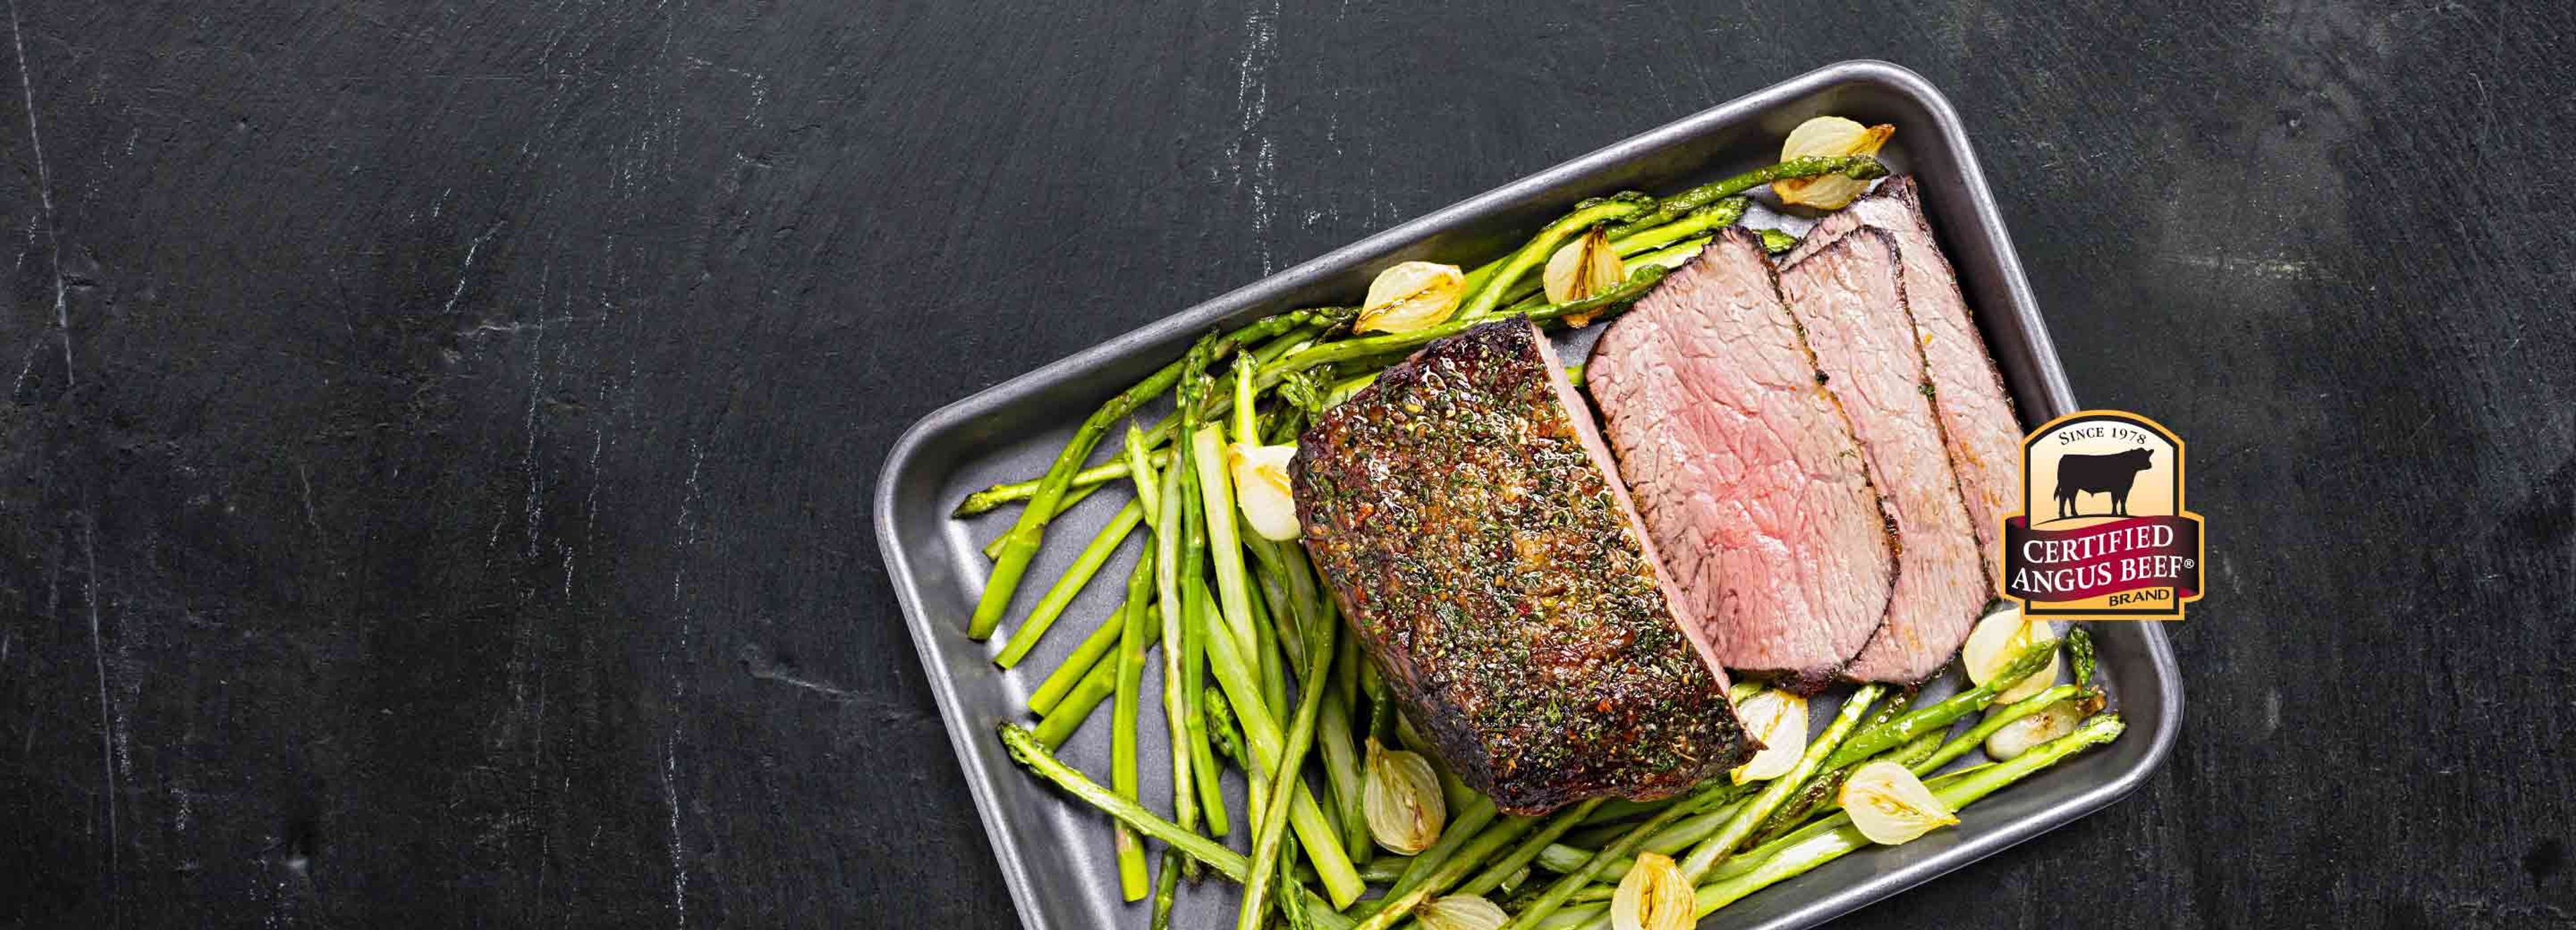 How to Roast Beef, recipes  Certified Angus Beef® brand - If it's